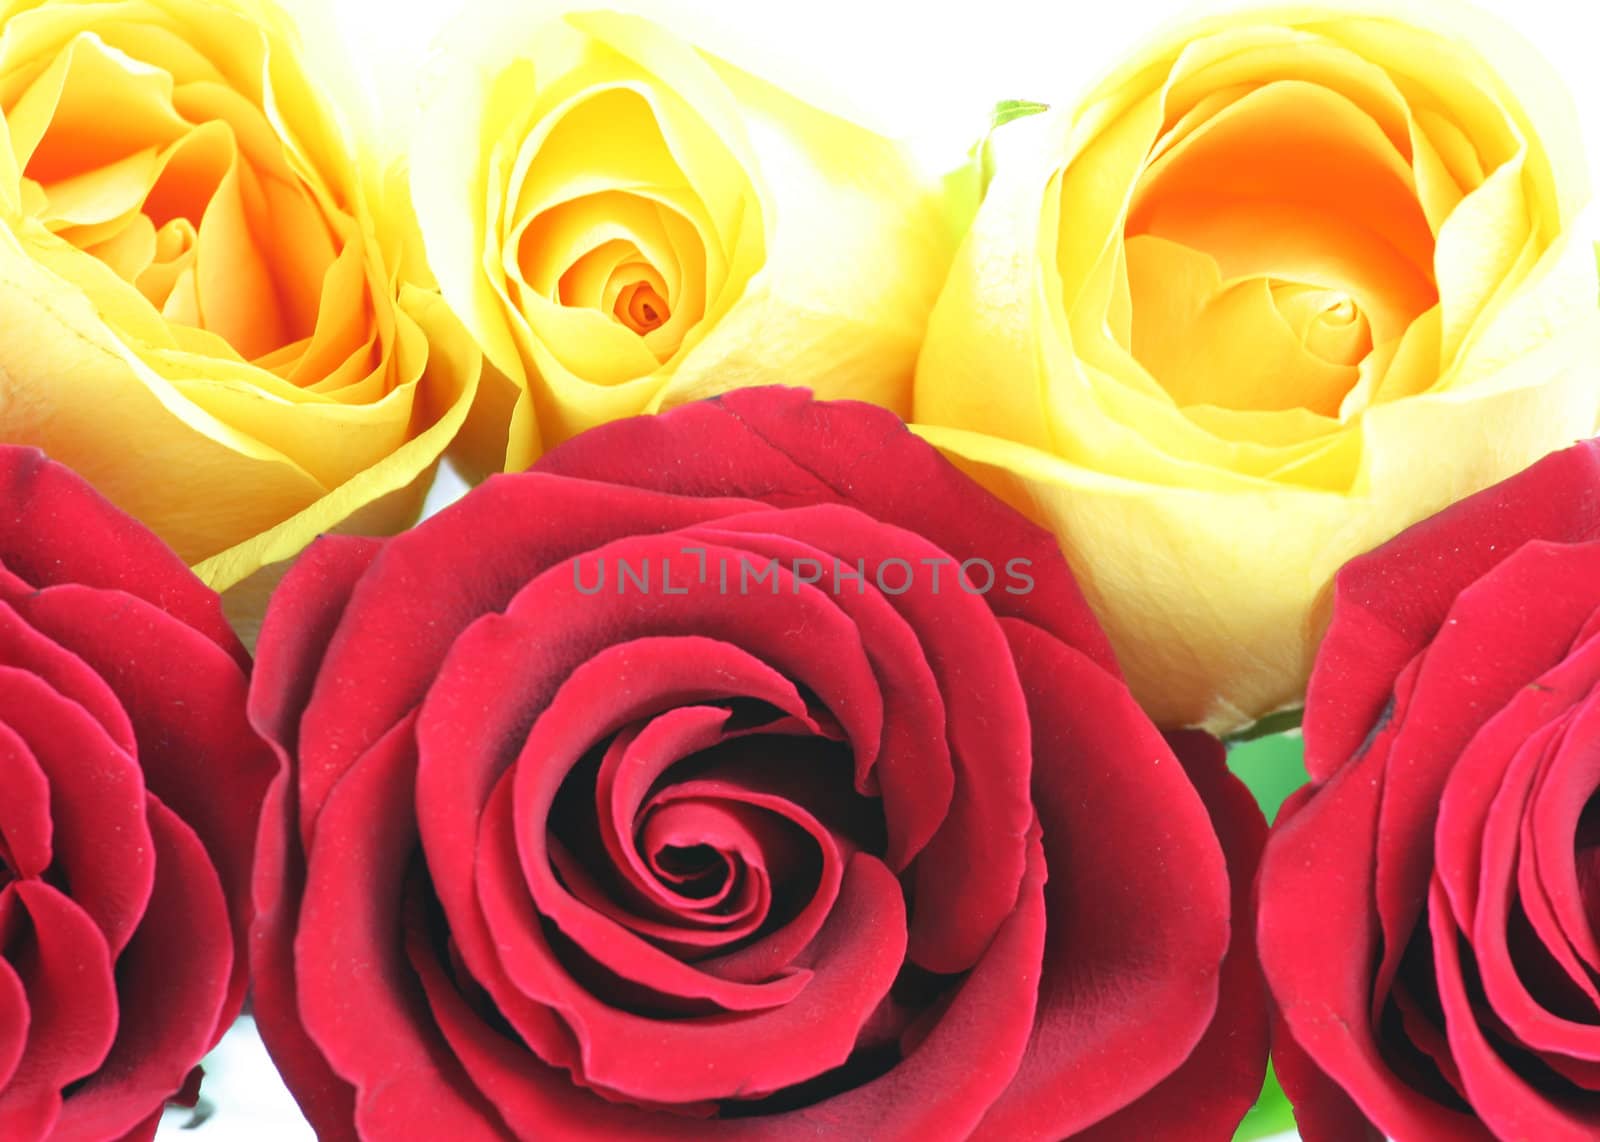 Three red and three yellow roses.